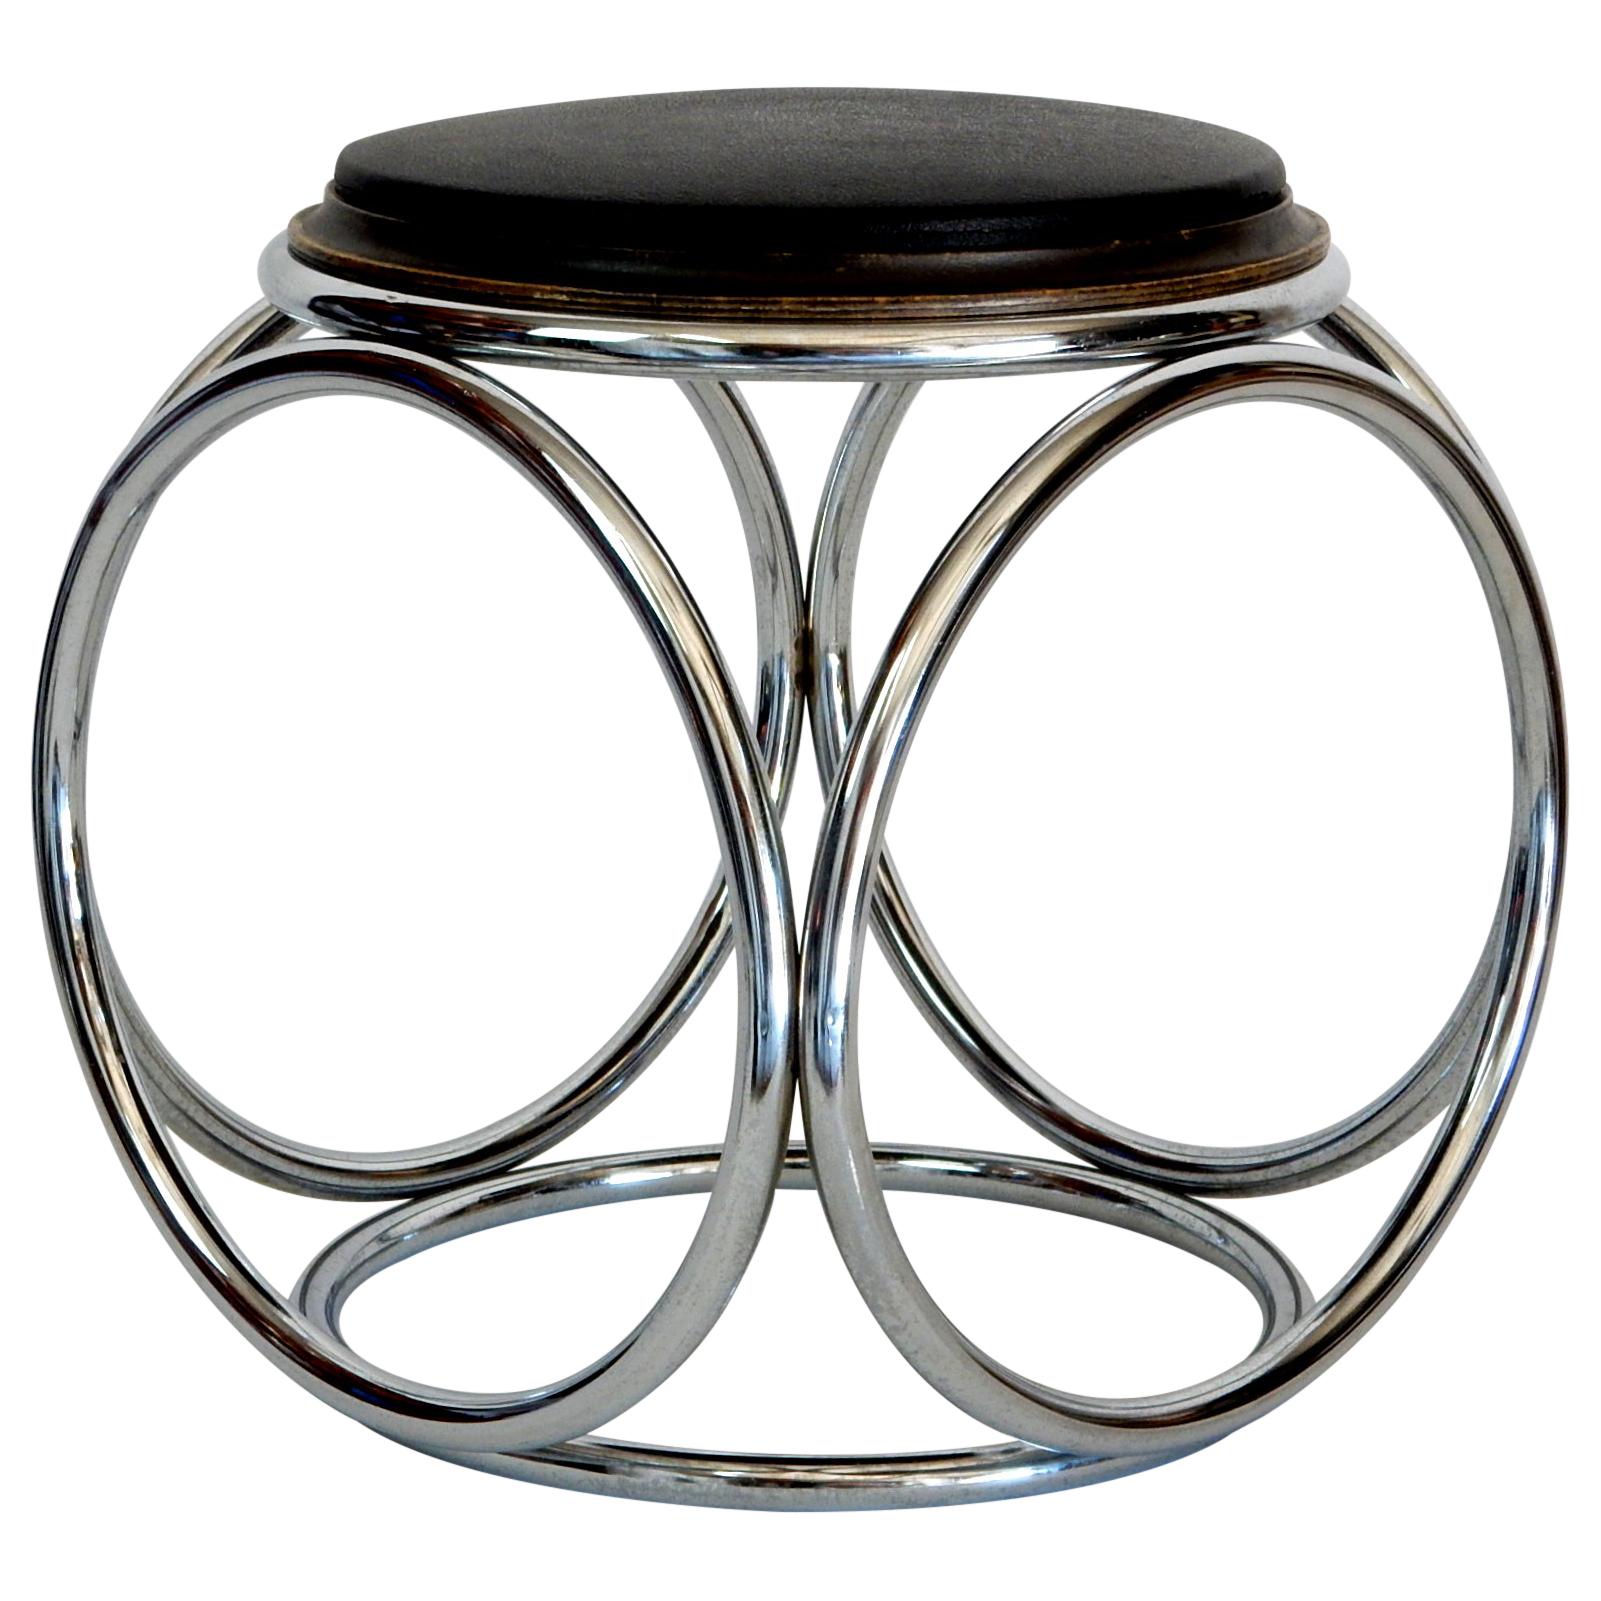 French Art Deco Jean-Pierre Laporte Design Tubular Circle Stool or Table For Sale